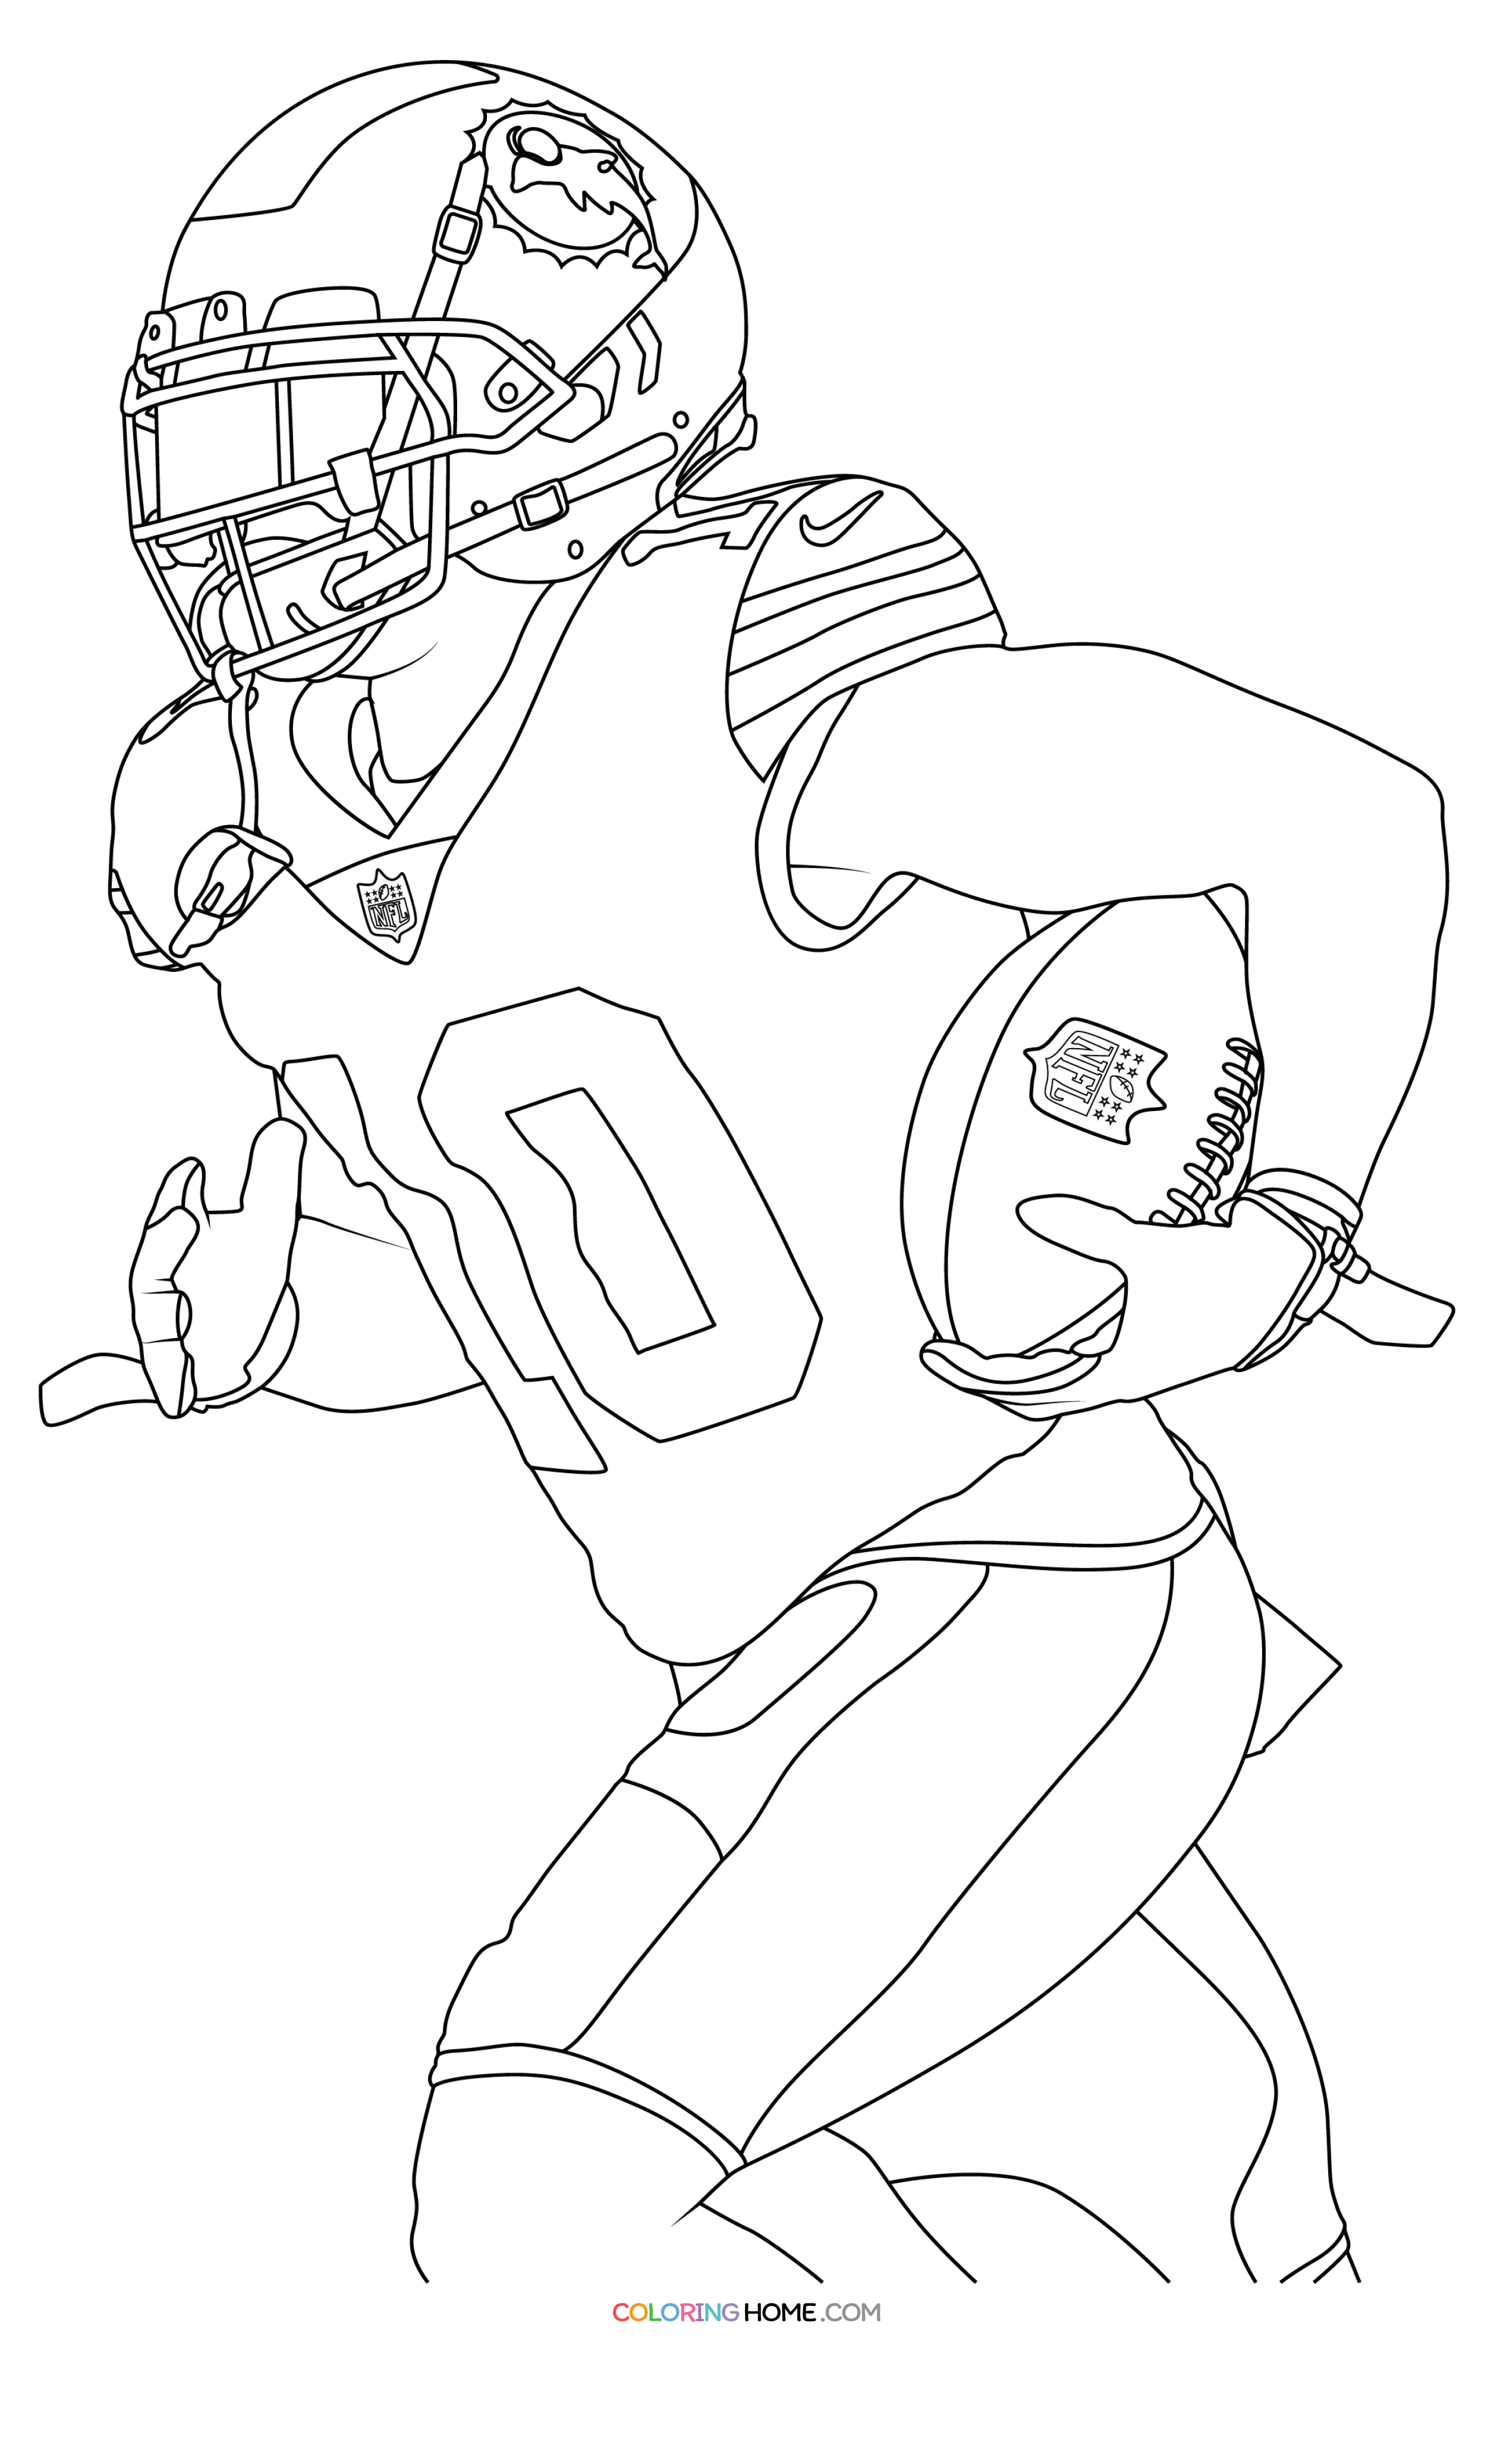 Tyreek Hill football coloring page